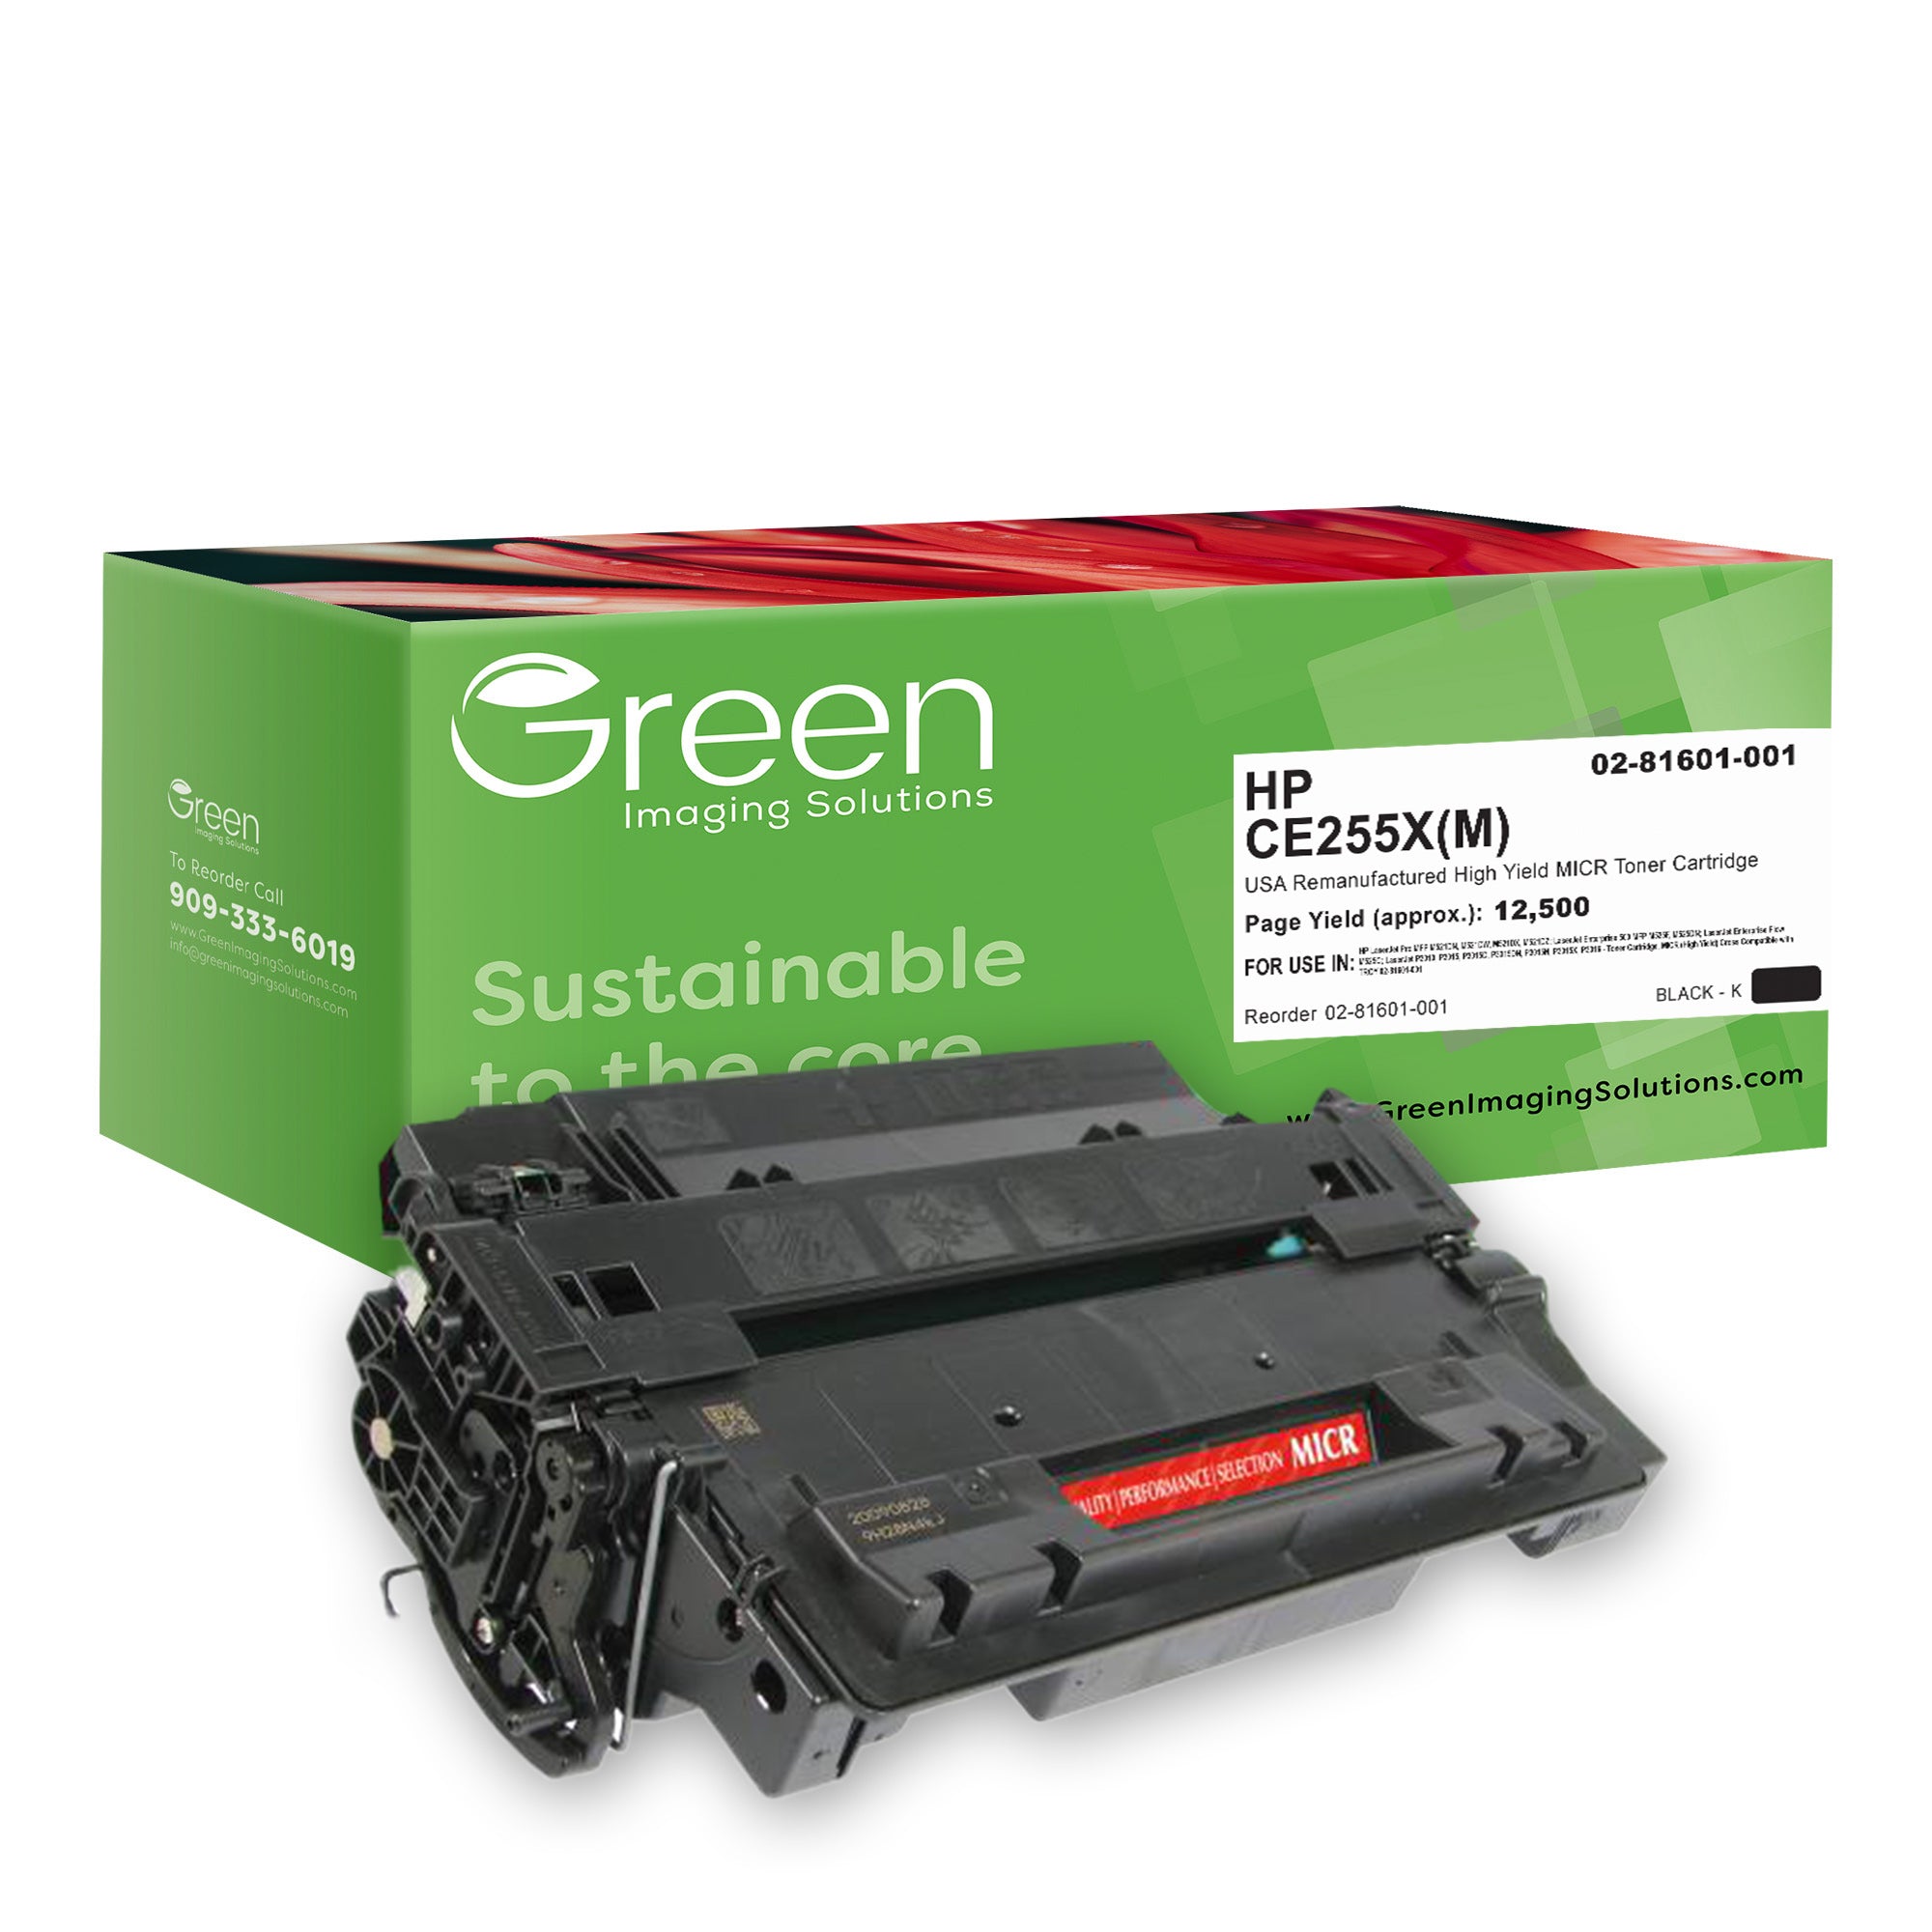 High Yield MICR Toner Cartridge for HP CE255X, TROY 02-81601-001 – Green  Imaging Solutions